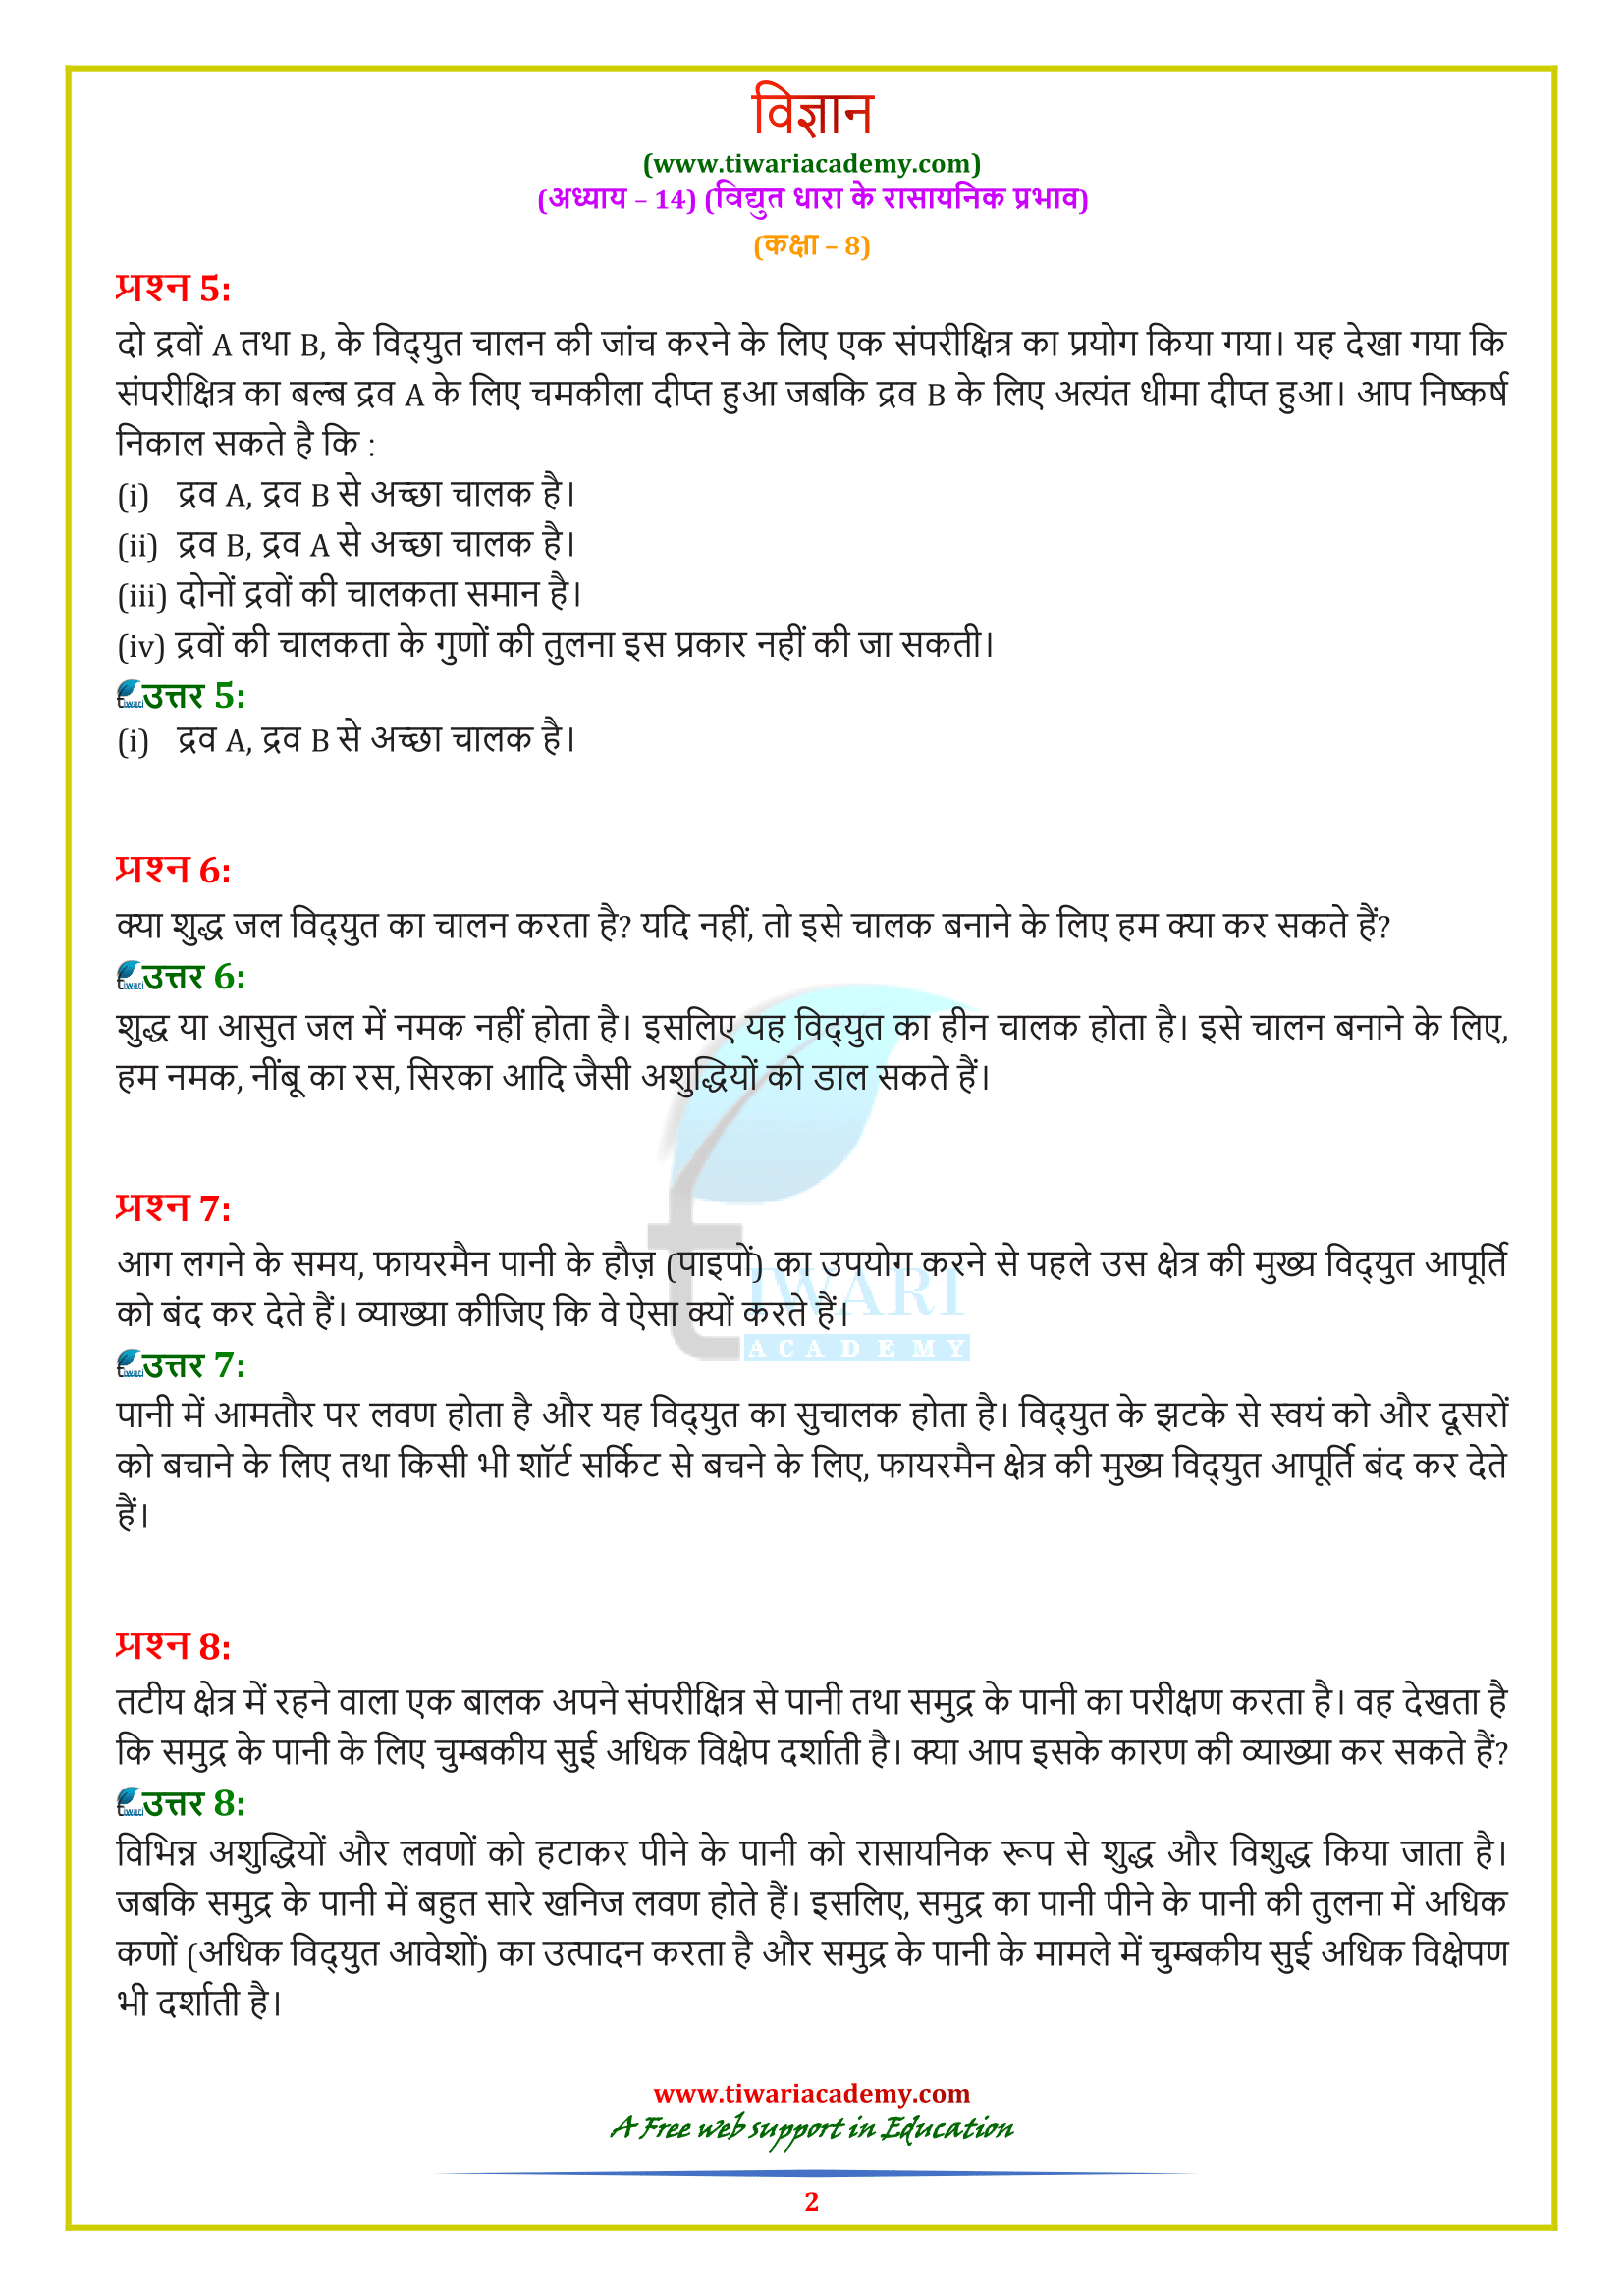 NCERT Solutions for Class 8 Science Chapter 14 in Hindi Medium